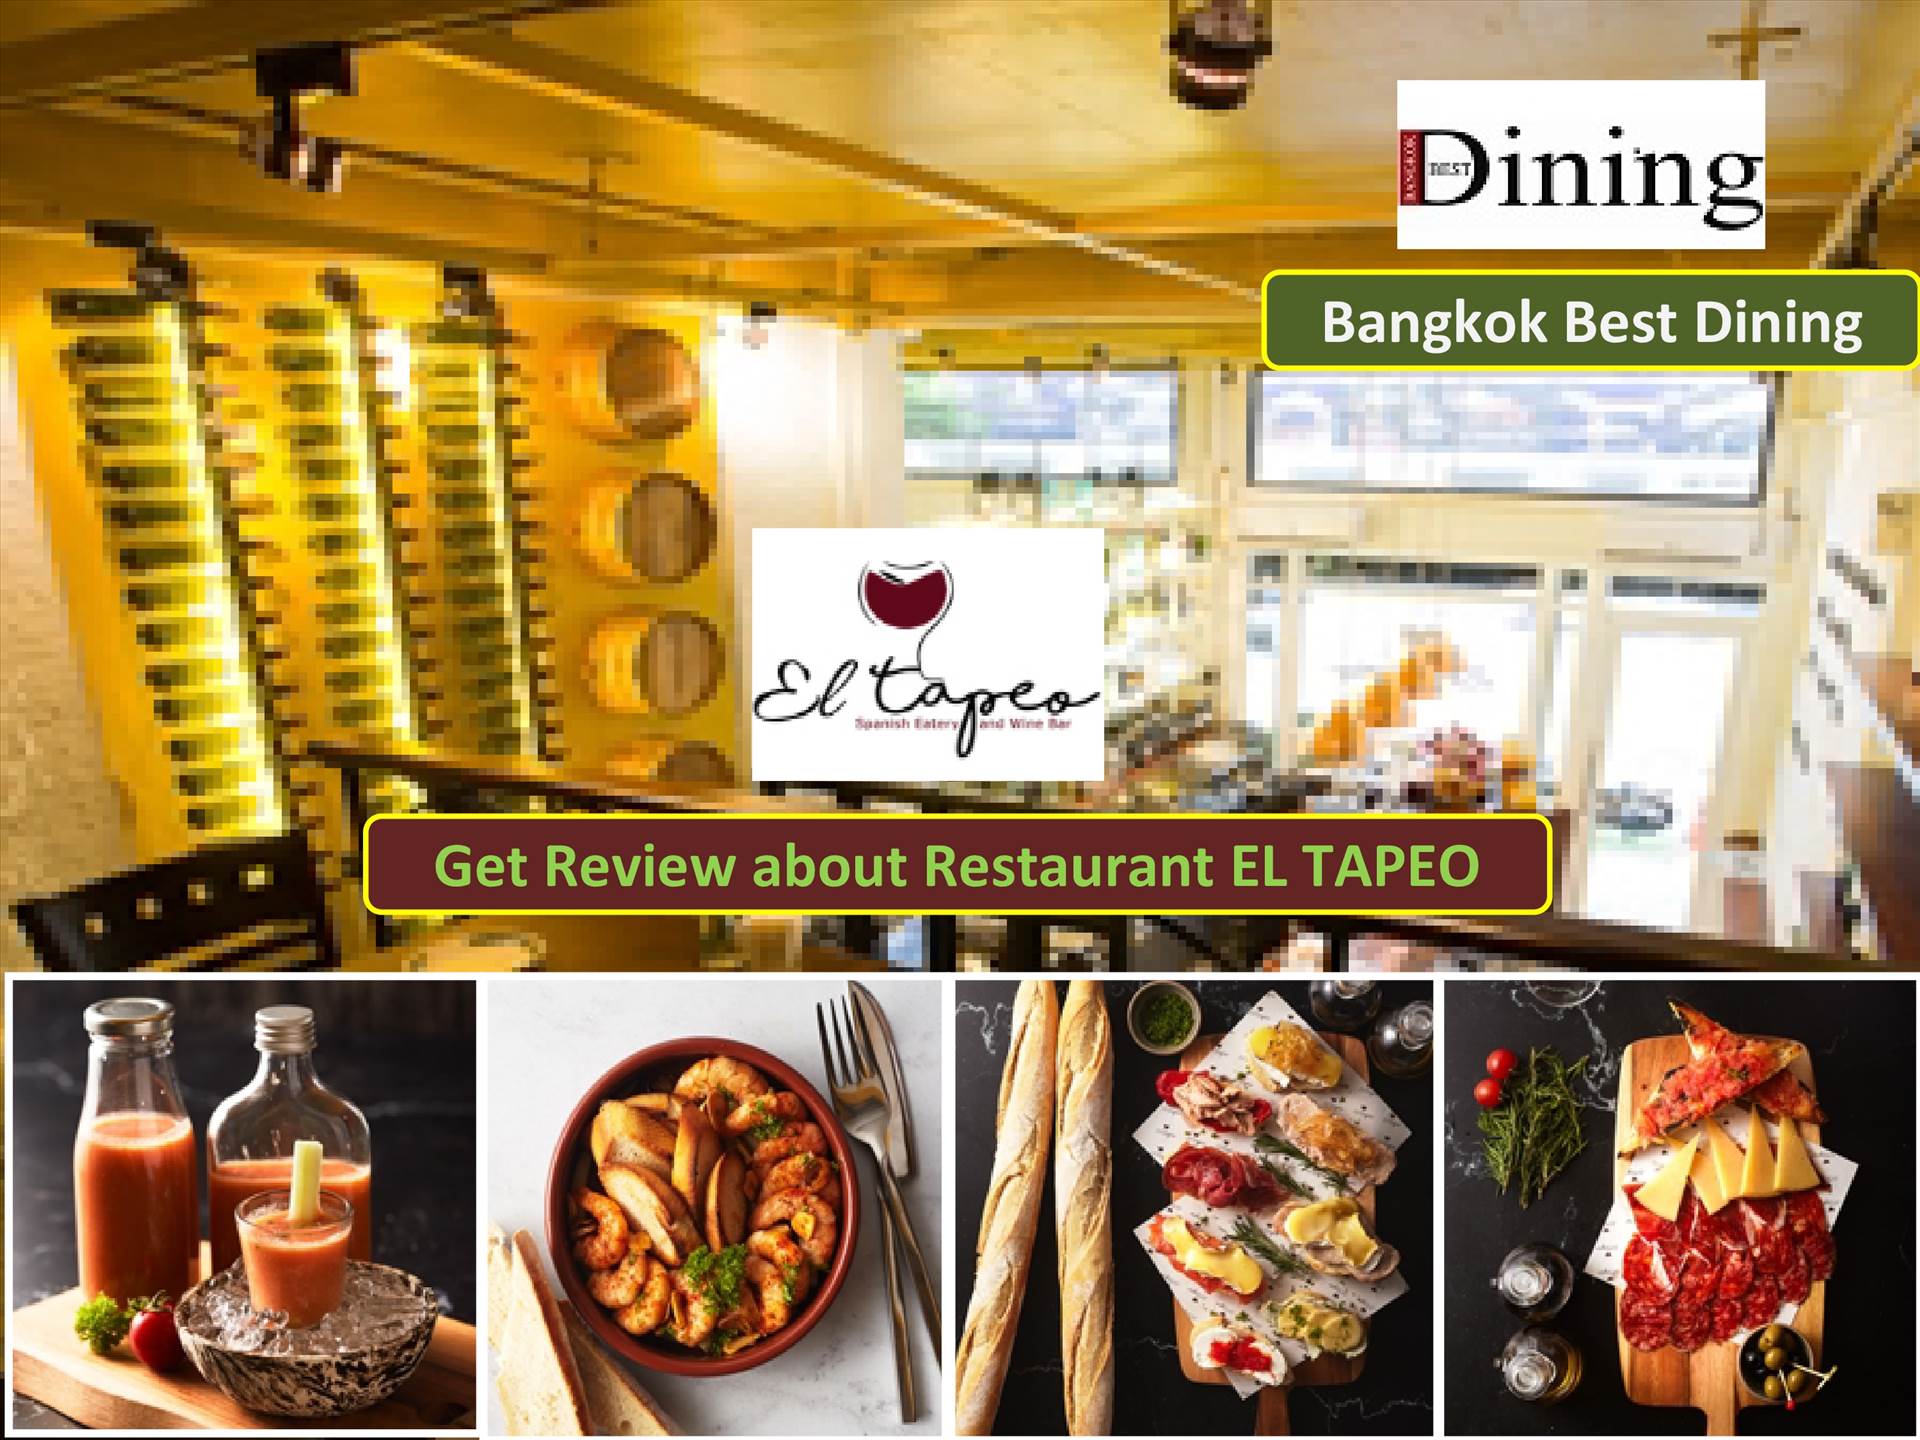 EL TAPEO - Bangkok Best Dining.jpg Authentic tapas and other Spanish specials are served in this perfectly located Thonglor restaurant, which is a sister outlet to a well-established Madrid restaurant. To know more about restaurant, kindly visit http://www.bangkokbestdining.com/review-deta by bangkokbestdining